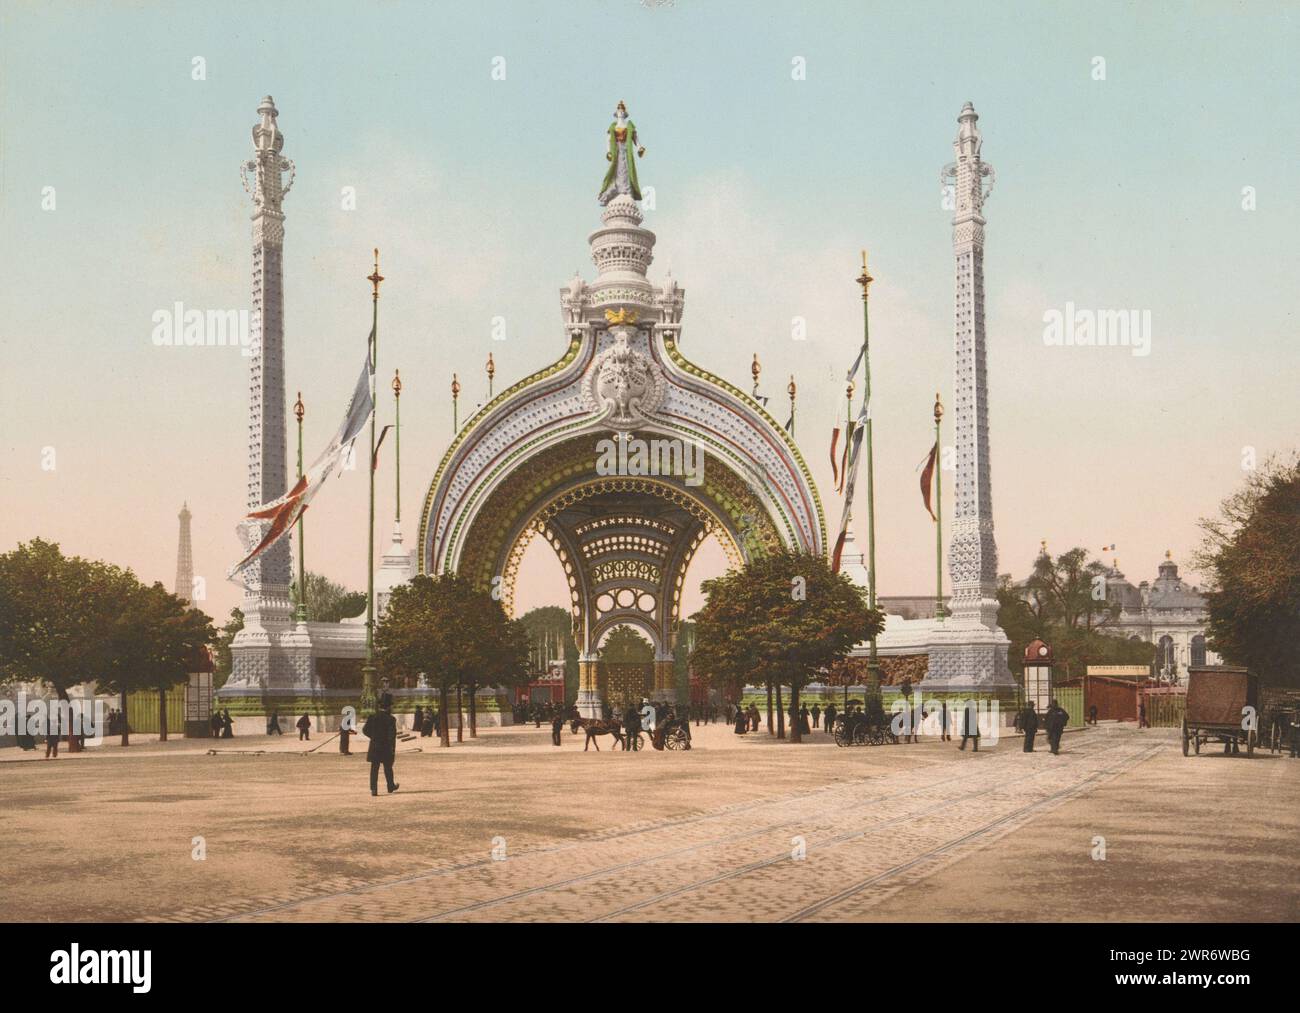 Entrance to the 1900 World Exhibition in Paris, maker: anonymous, Paris, c. 1900, paper, photochrom, height 166 mm × width 228 mm, photomechanical print Stock Photo